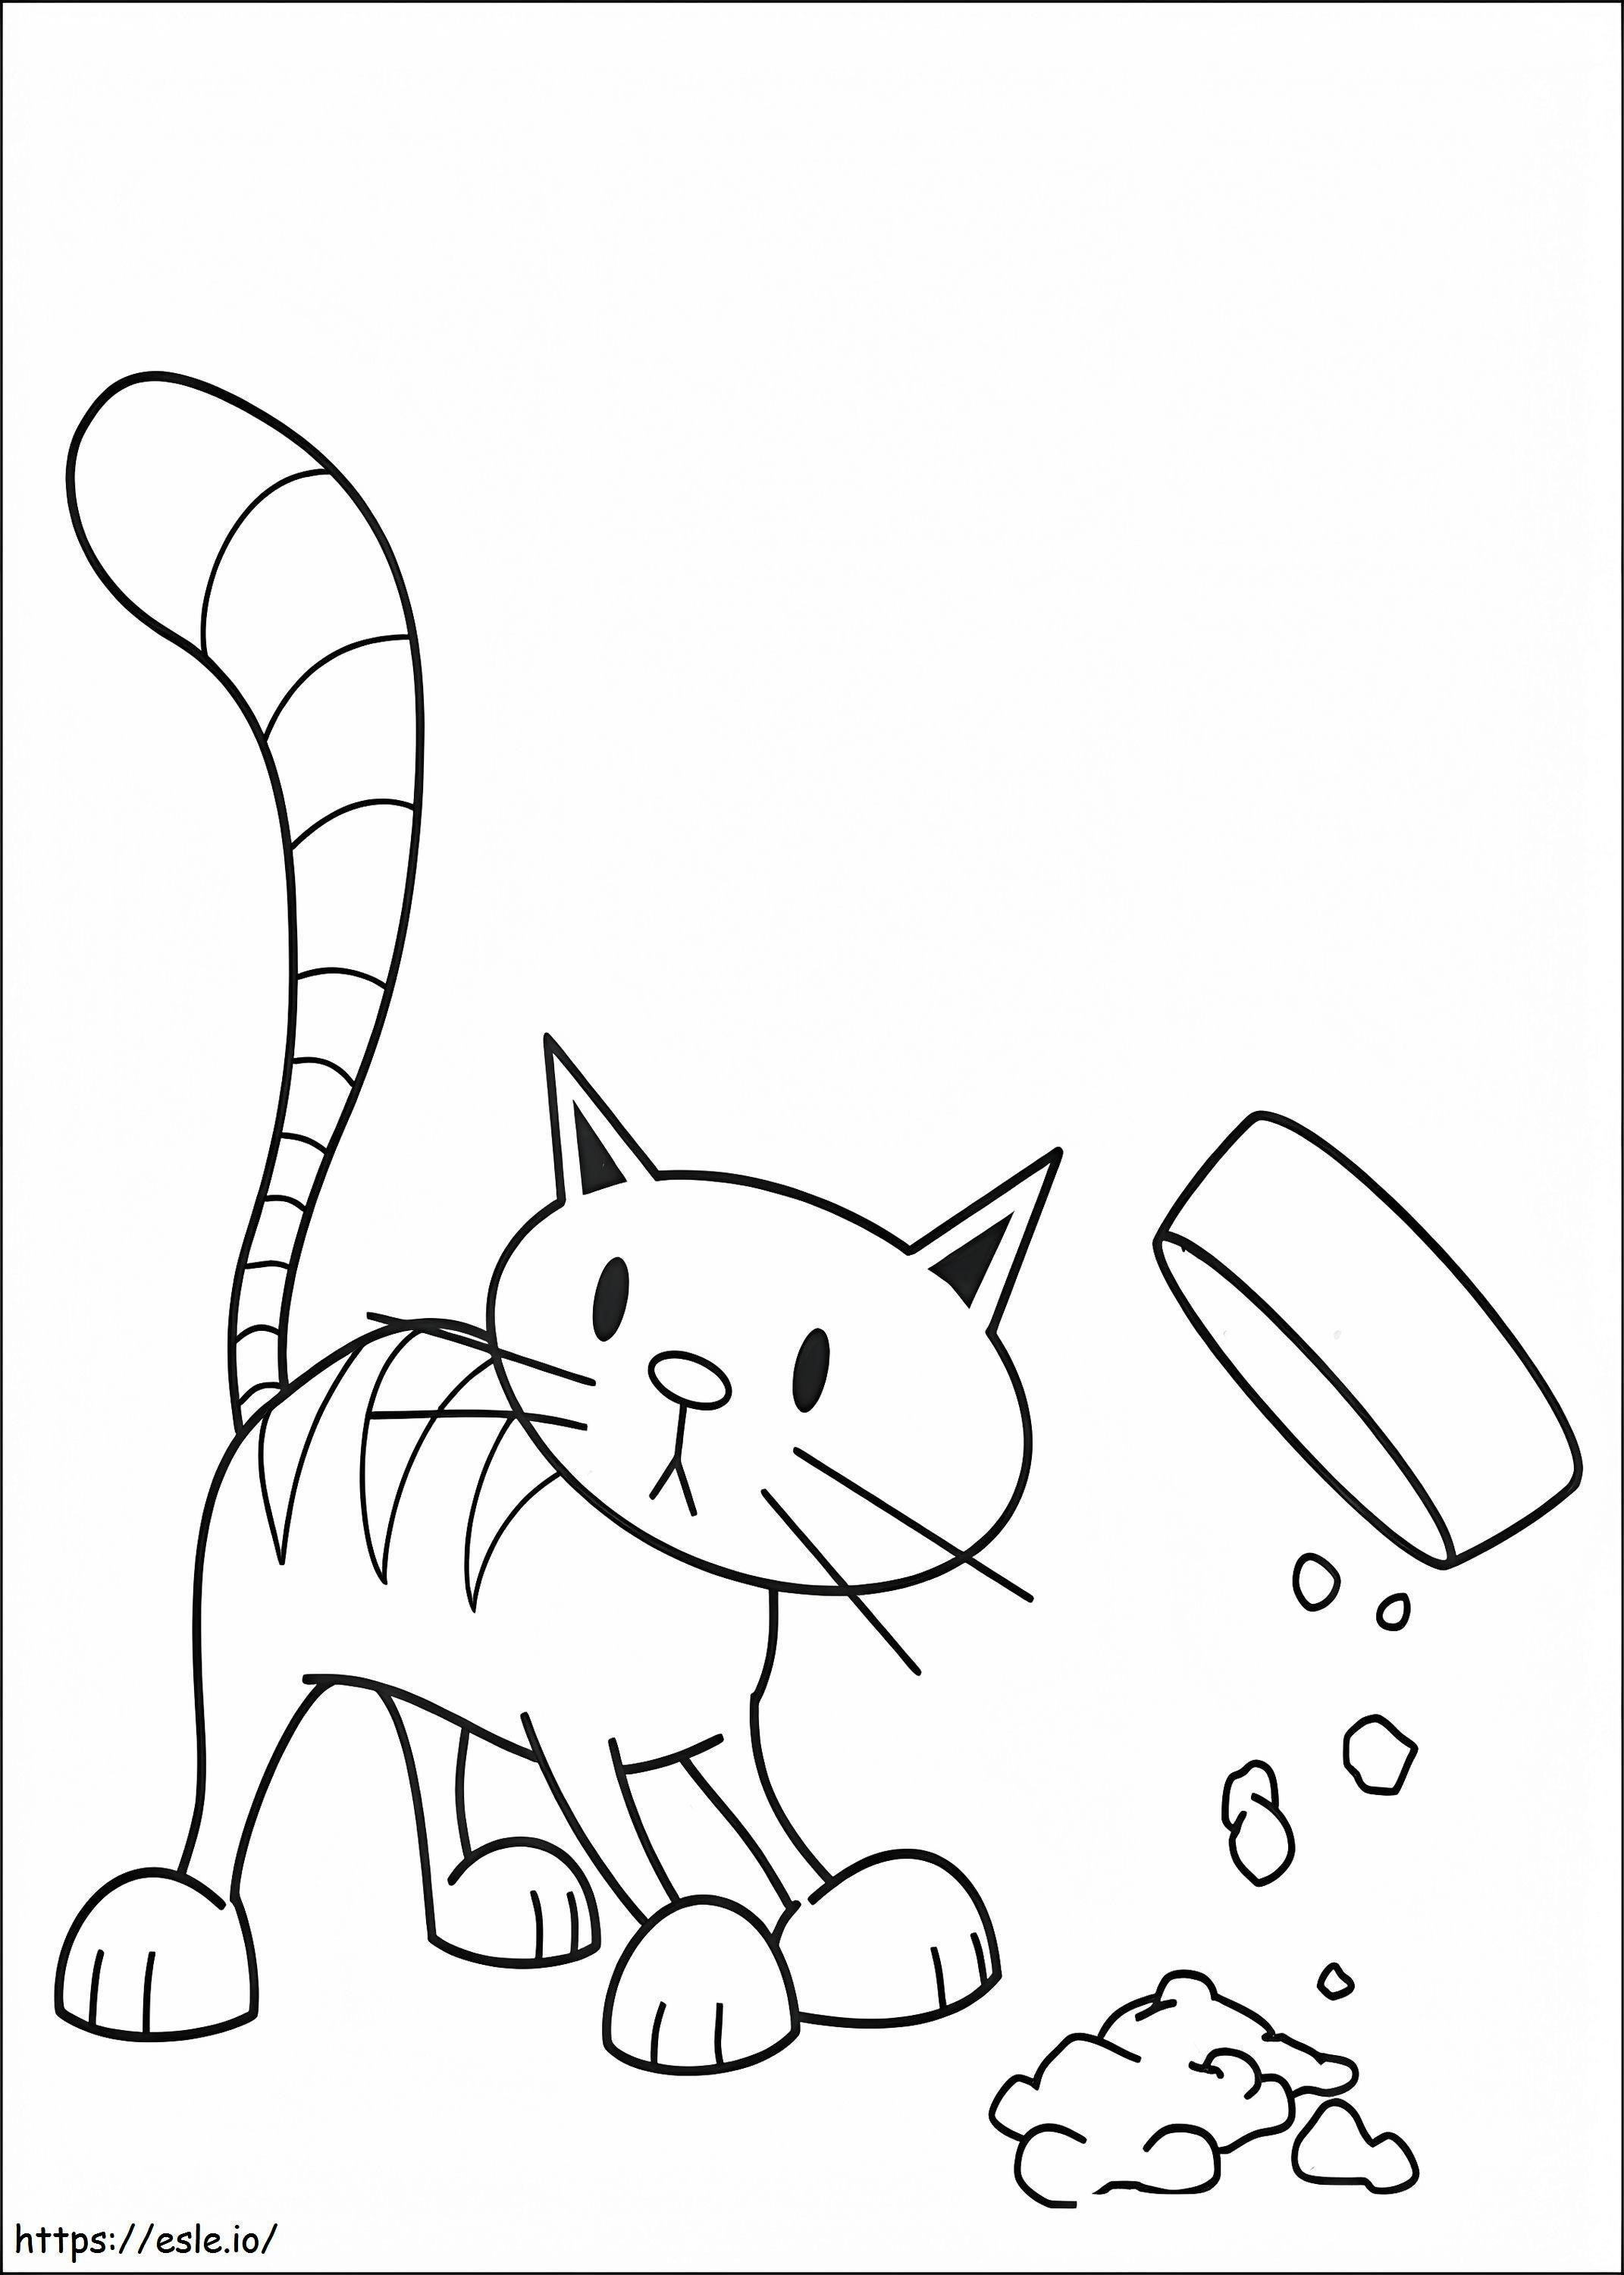 1534124189 Pilchard And Food A4 coloring page